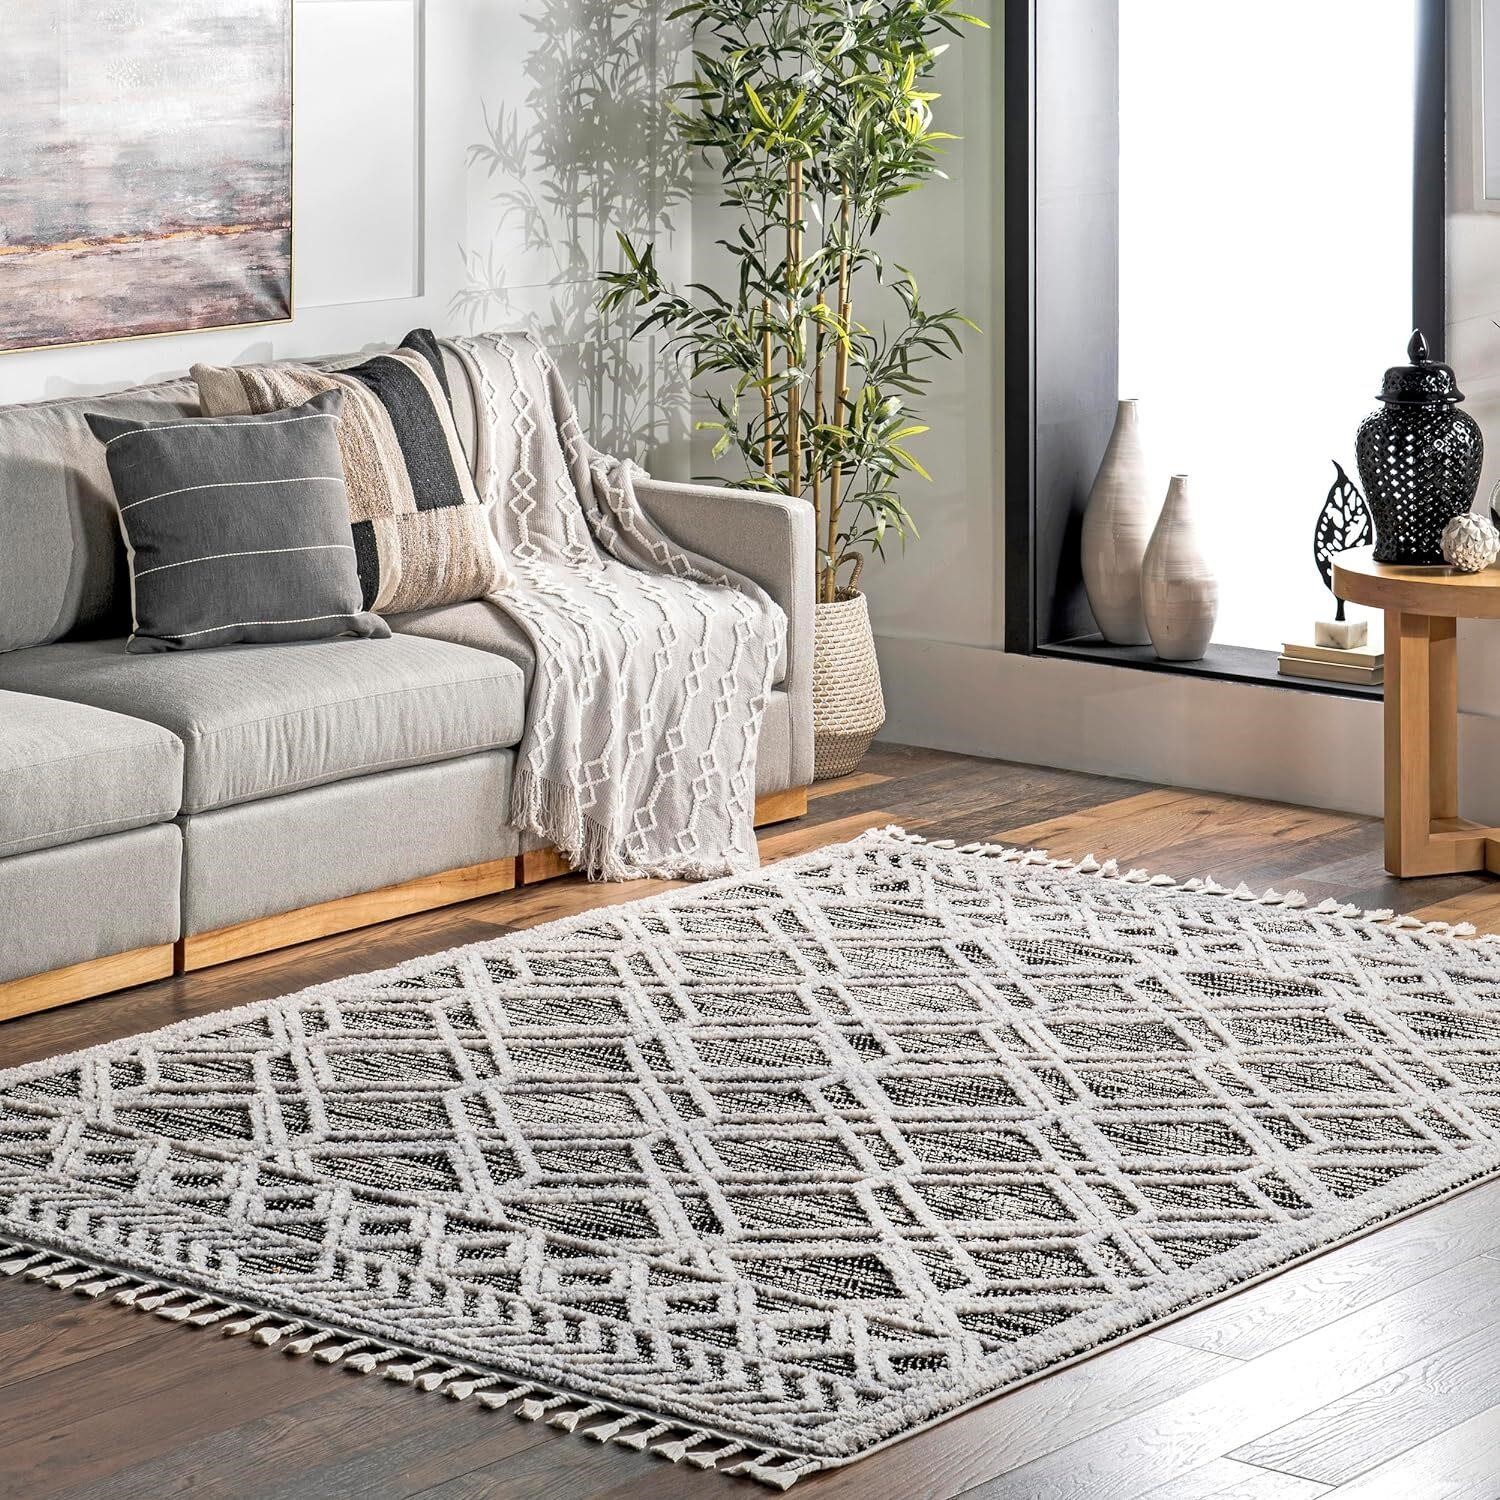 nuLOOM Moroccan Rug - 6'7x9' Grey/Off-White